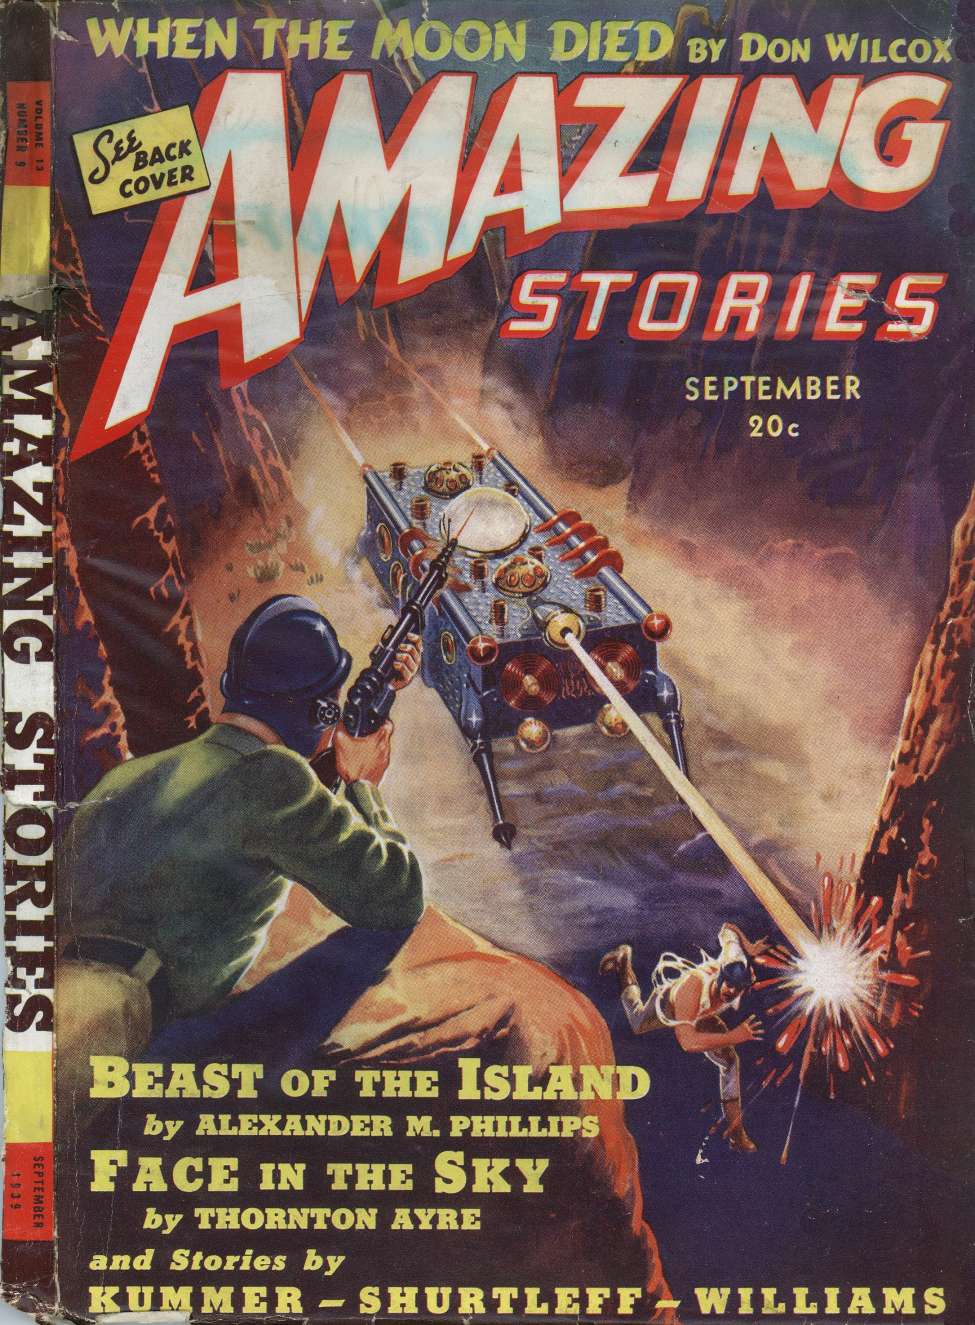 Comic Book Cover For Amazing Stories v13 9 - Beast of the Island - A. M. Phillips